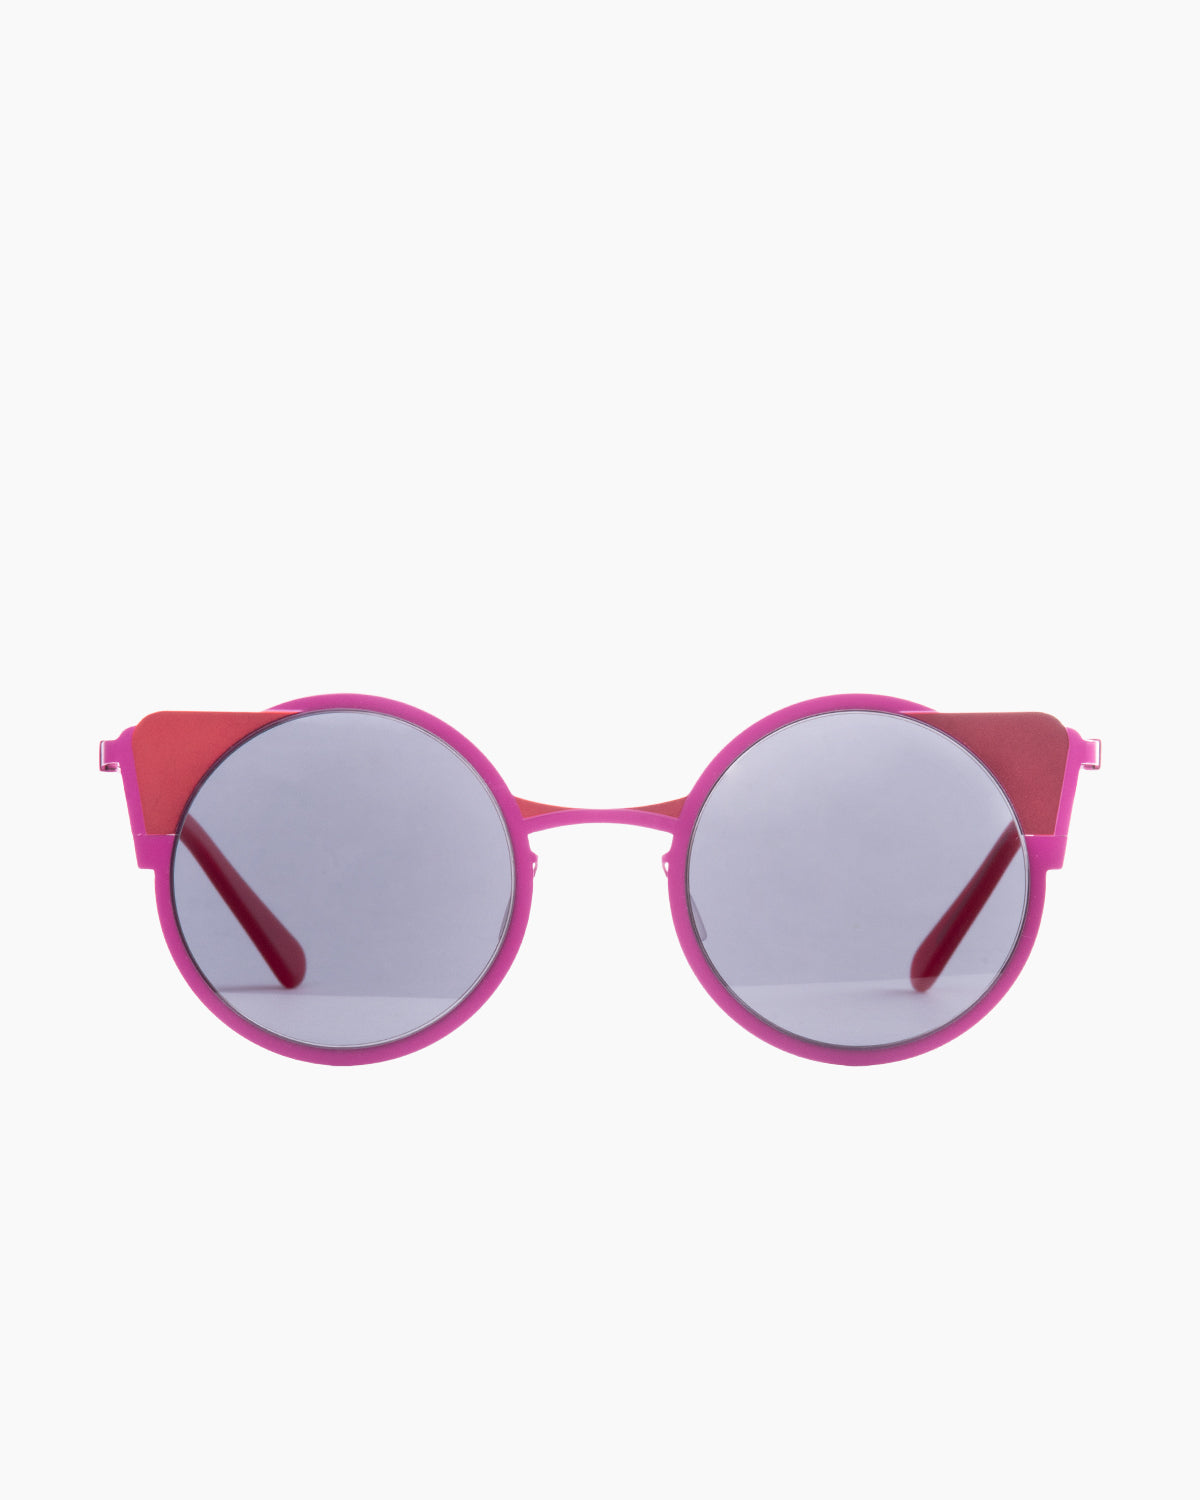 Gamine - Monti - Purple/Red | glasses bar:  Marie-Sophie Dion